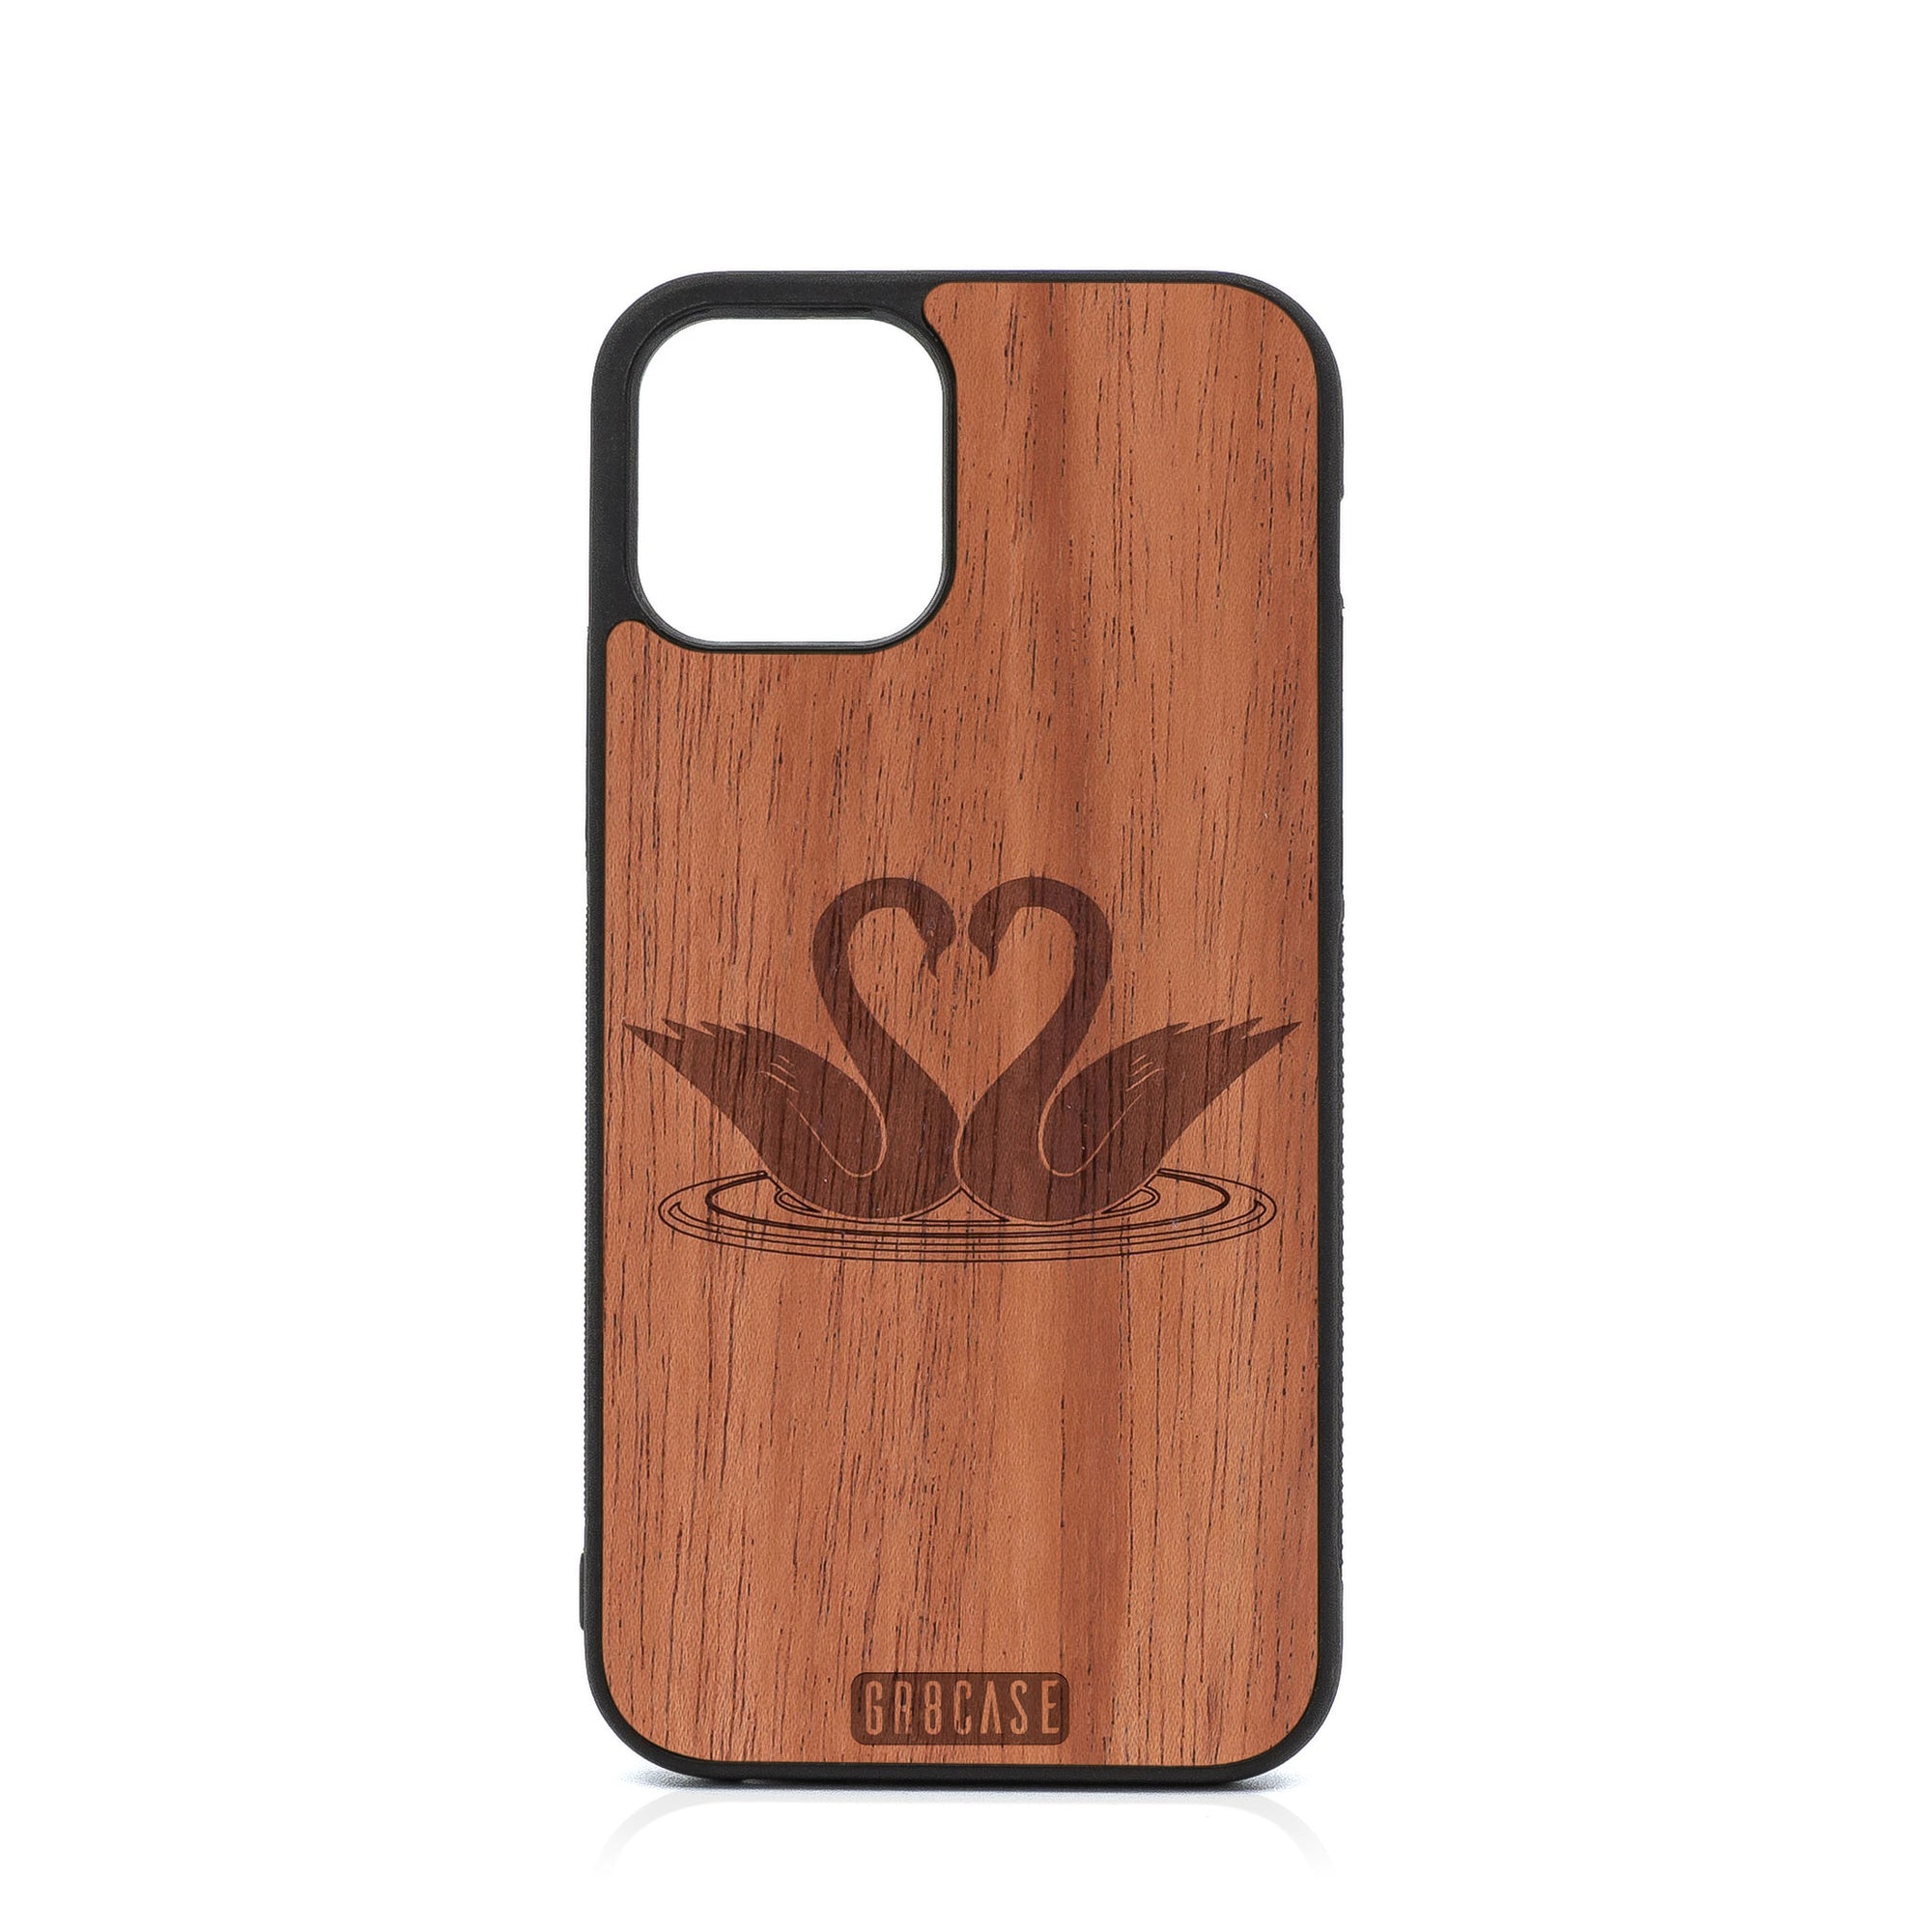 Swans Design Wood Case For iPhone 12